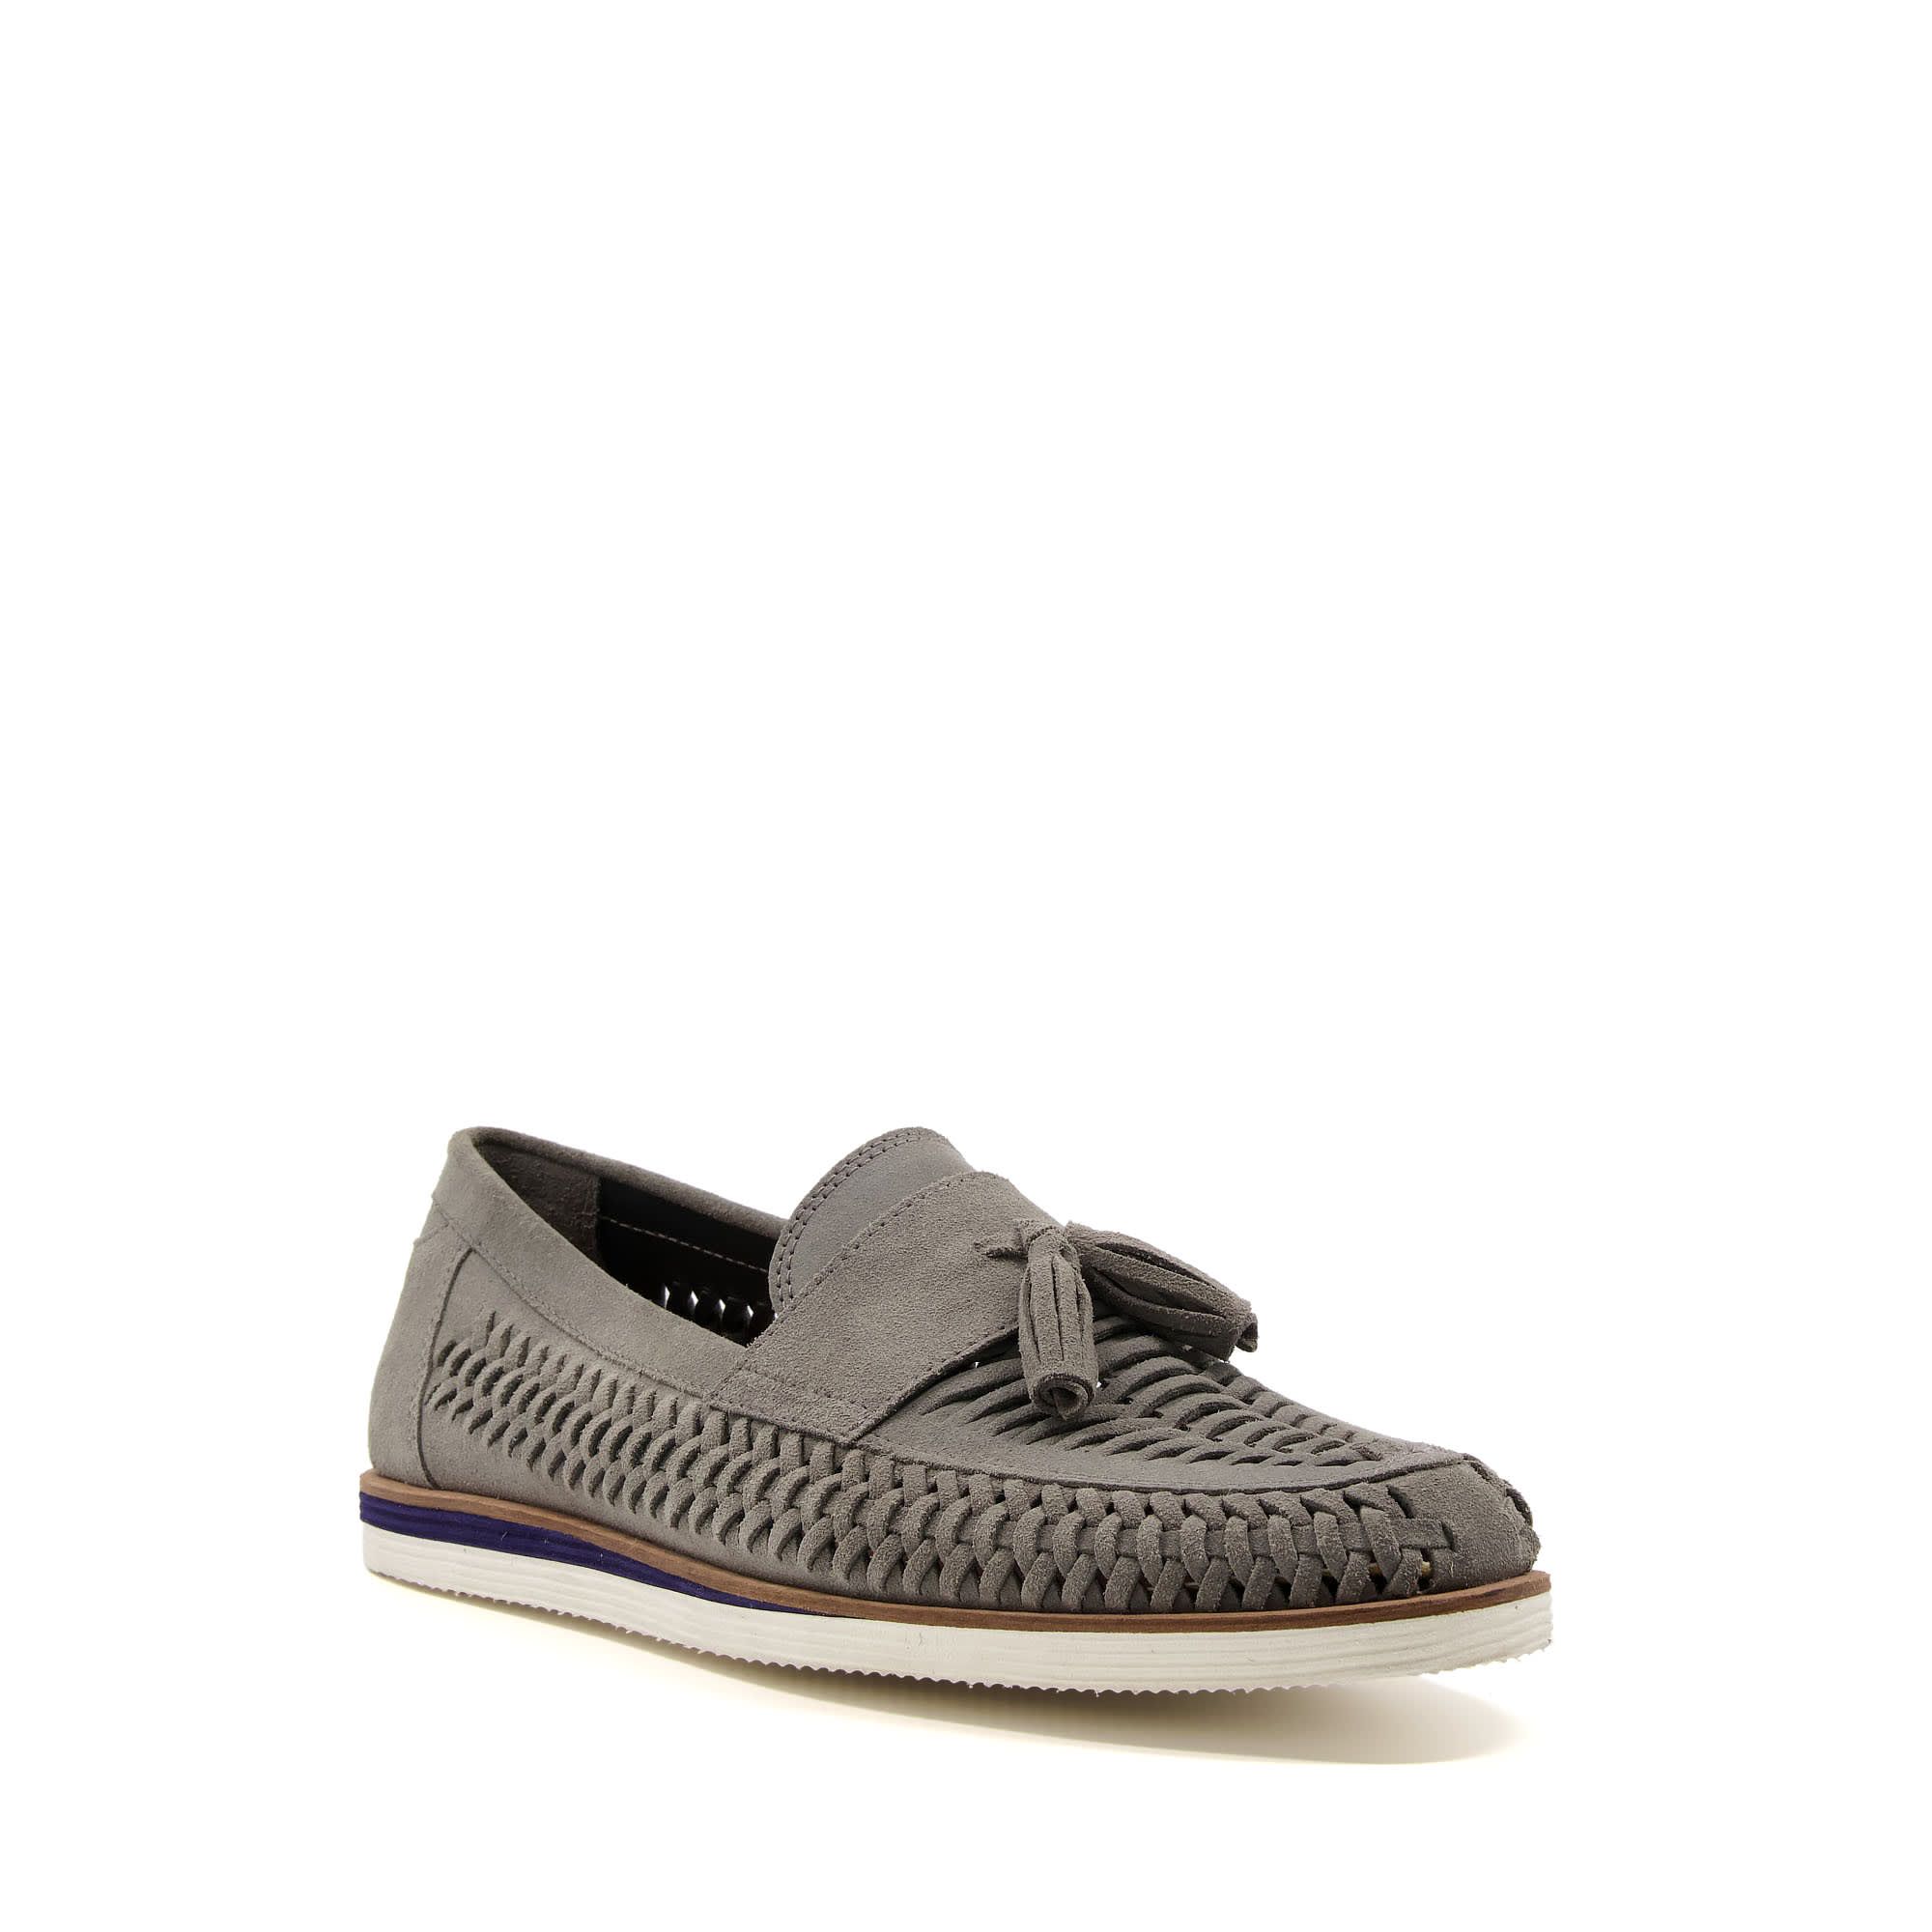 A go-to style for summer, our versatile Buckey loafers combine comfort and style. This easy-to-wear profile features woven side detailing and a traditional tassel trim. Perfect for seasonal events and everyday styling.